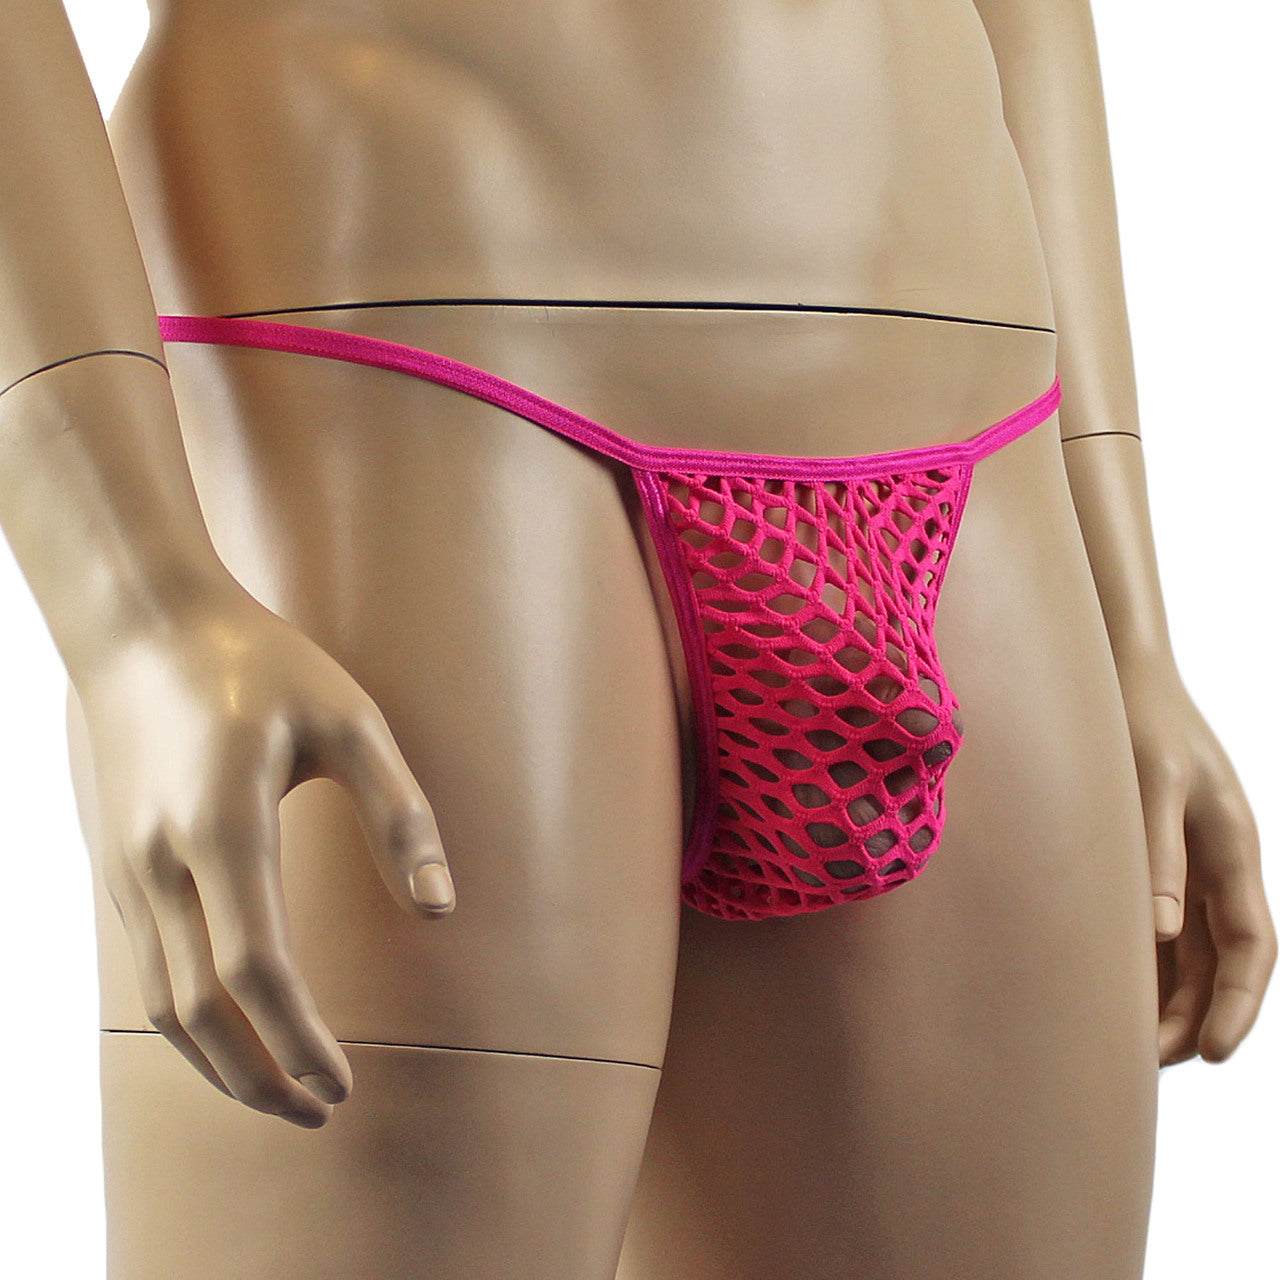 Mens Big Net Lingerie See-through Pouch G string Hot Pink